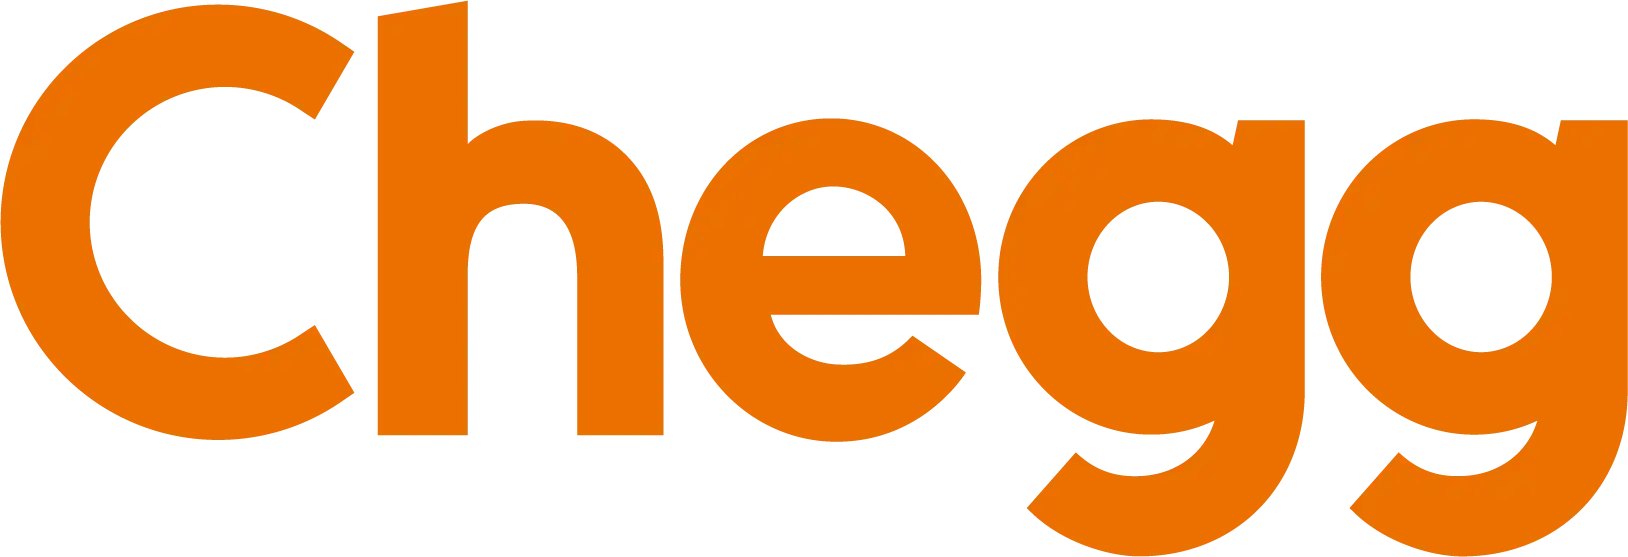 Chegg - Real World Skills to Launch Your Dream Career